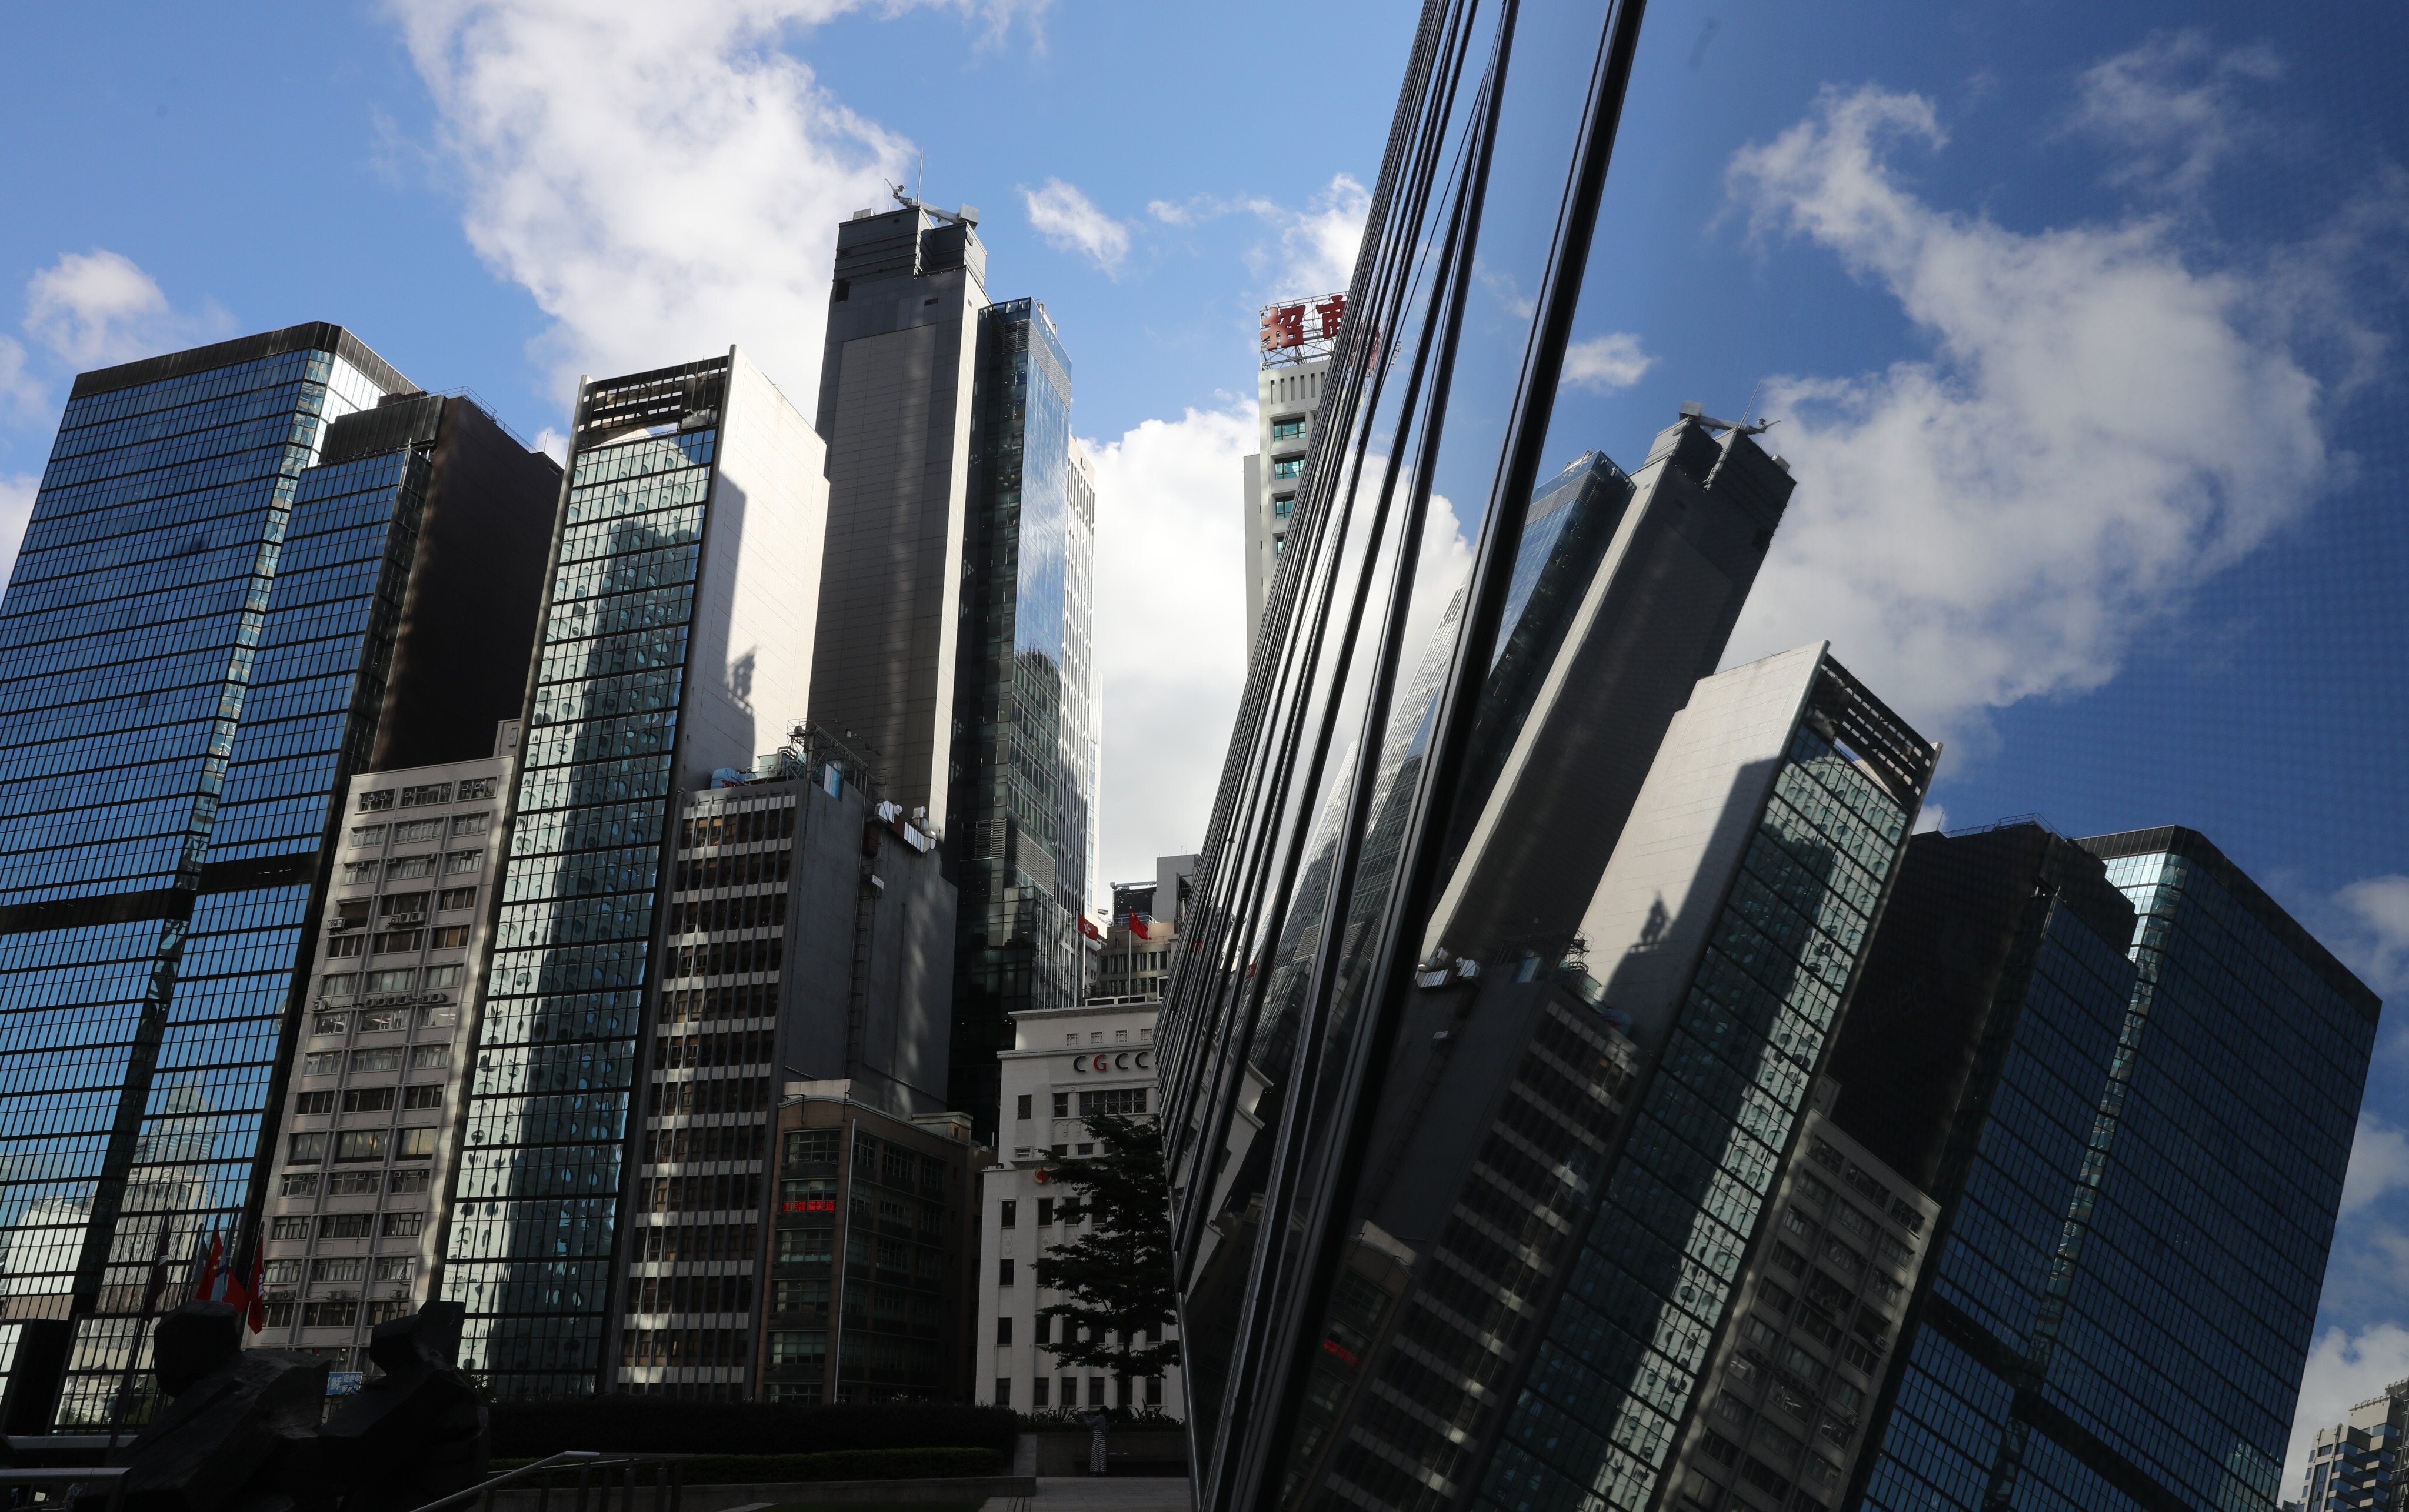 A reflection of commercial buildings in Central, Hong Kong. Photo: Dickson Lee